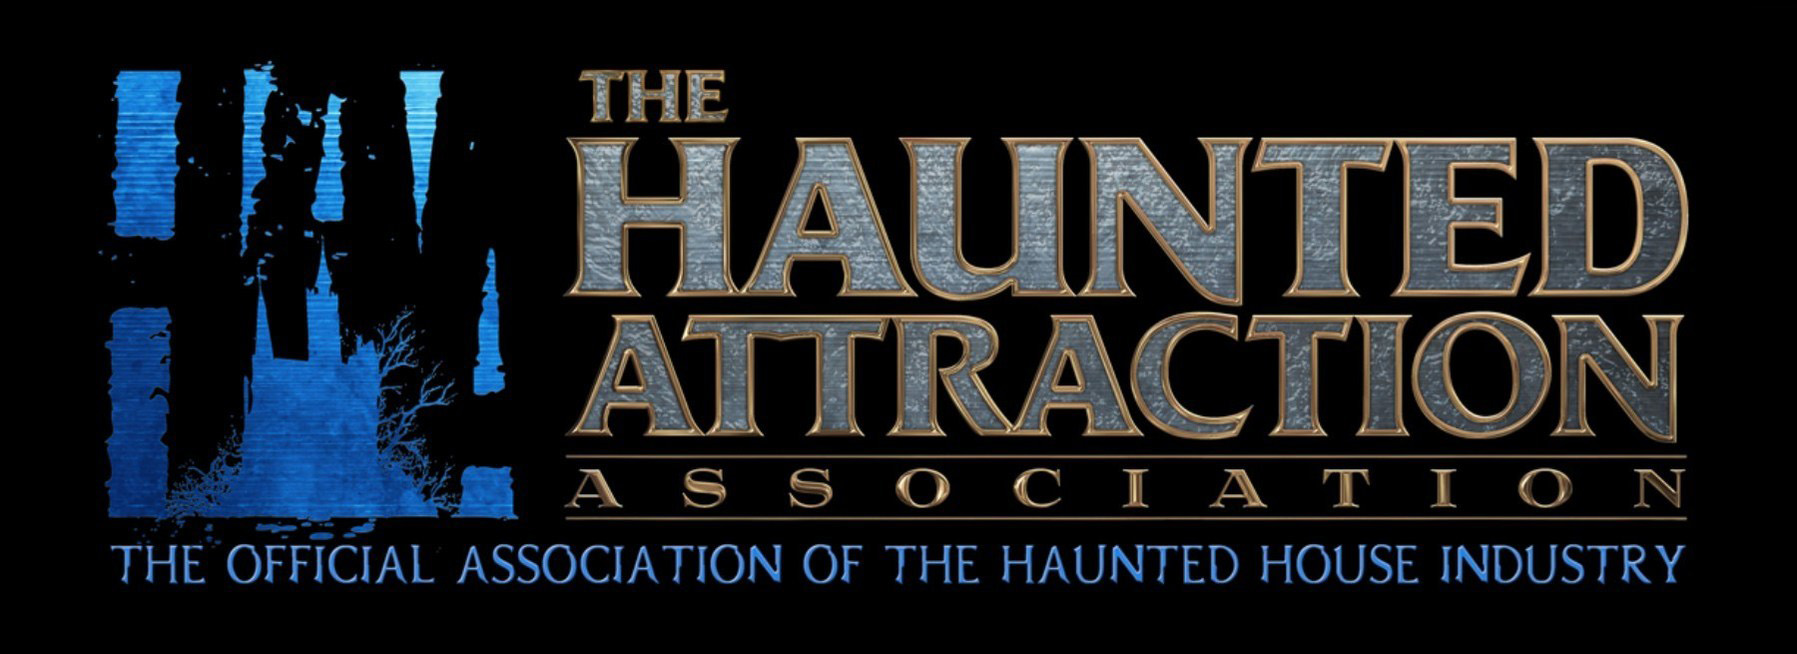 Proud Member of the Haunted Attraction Association